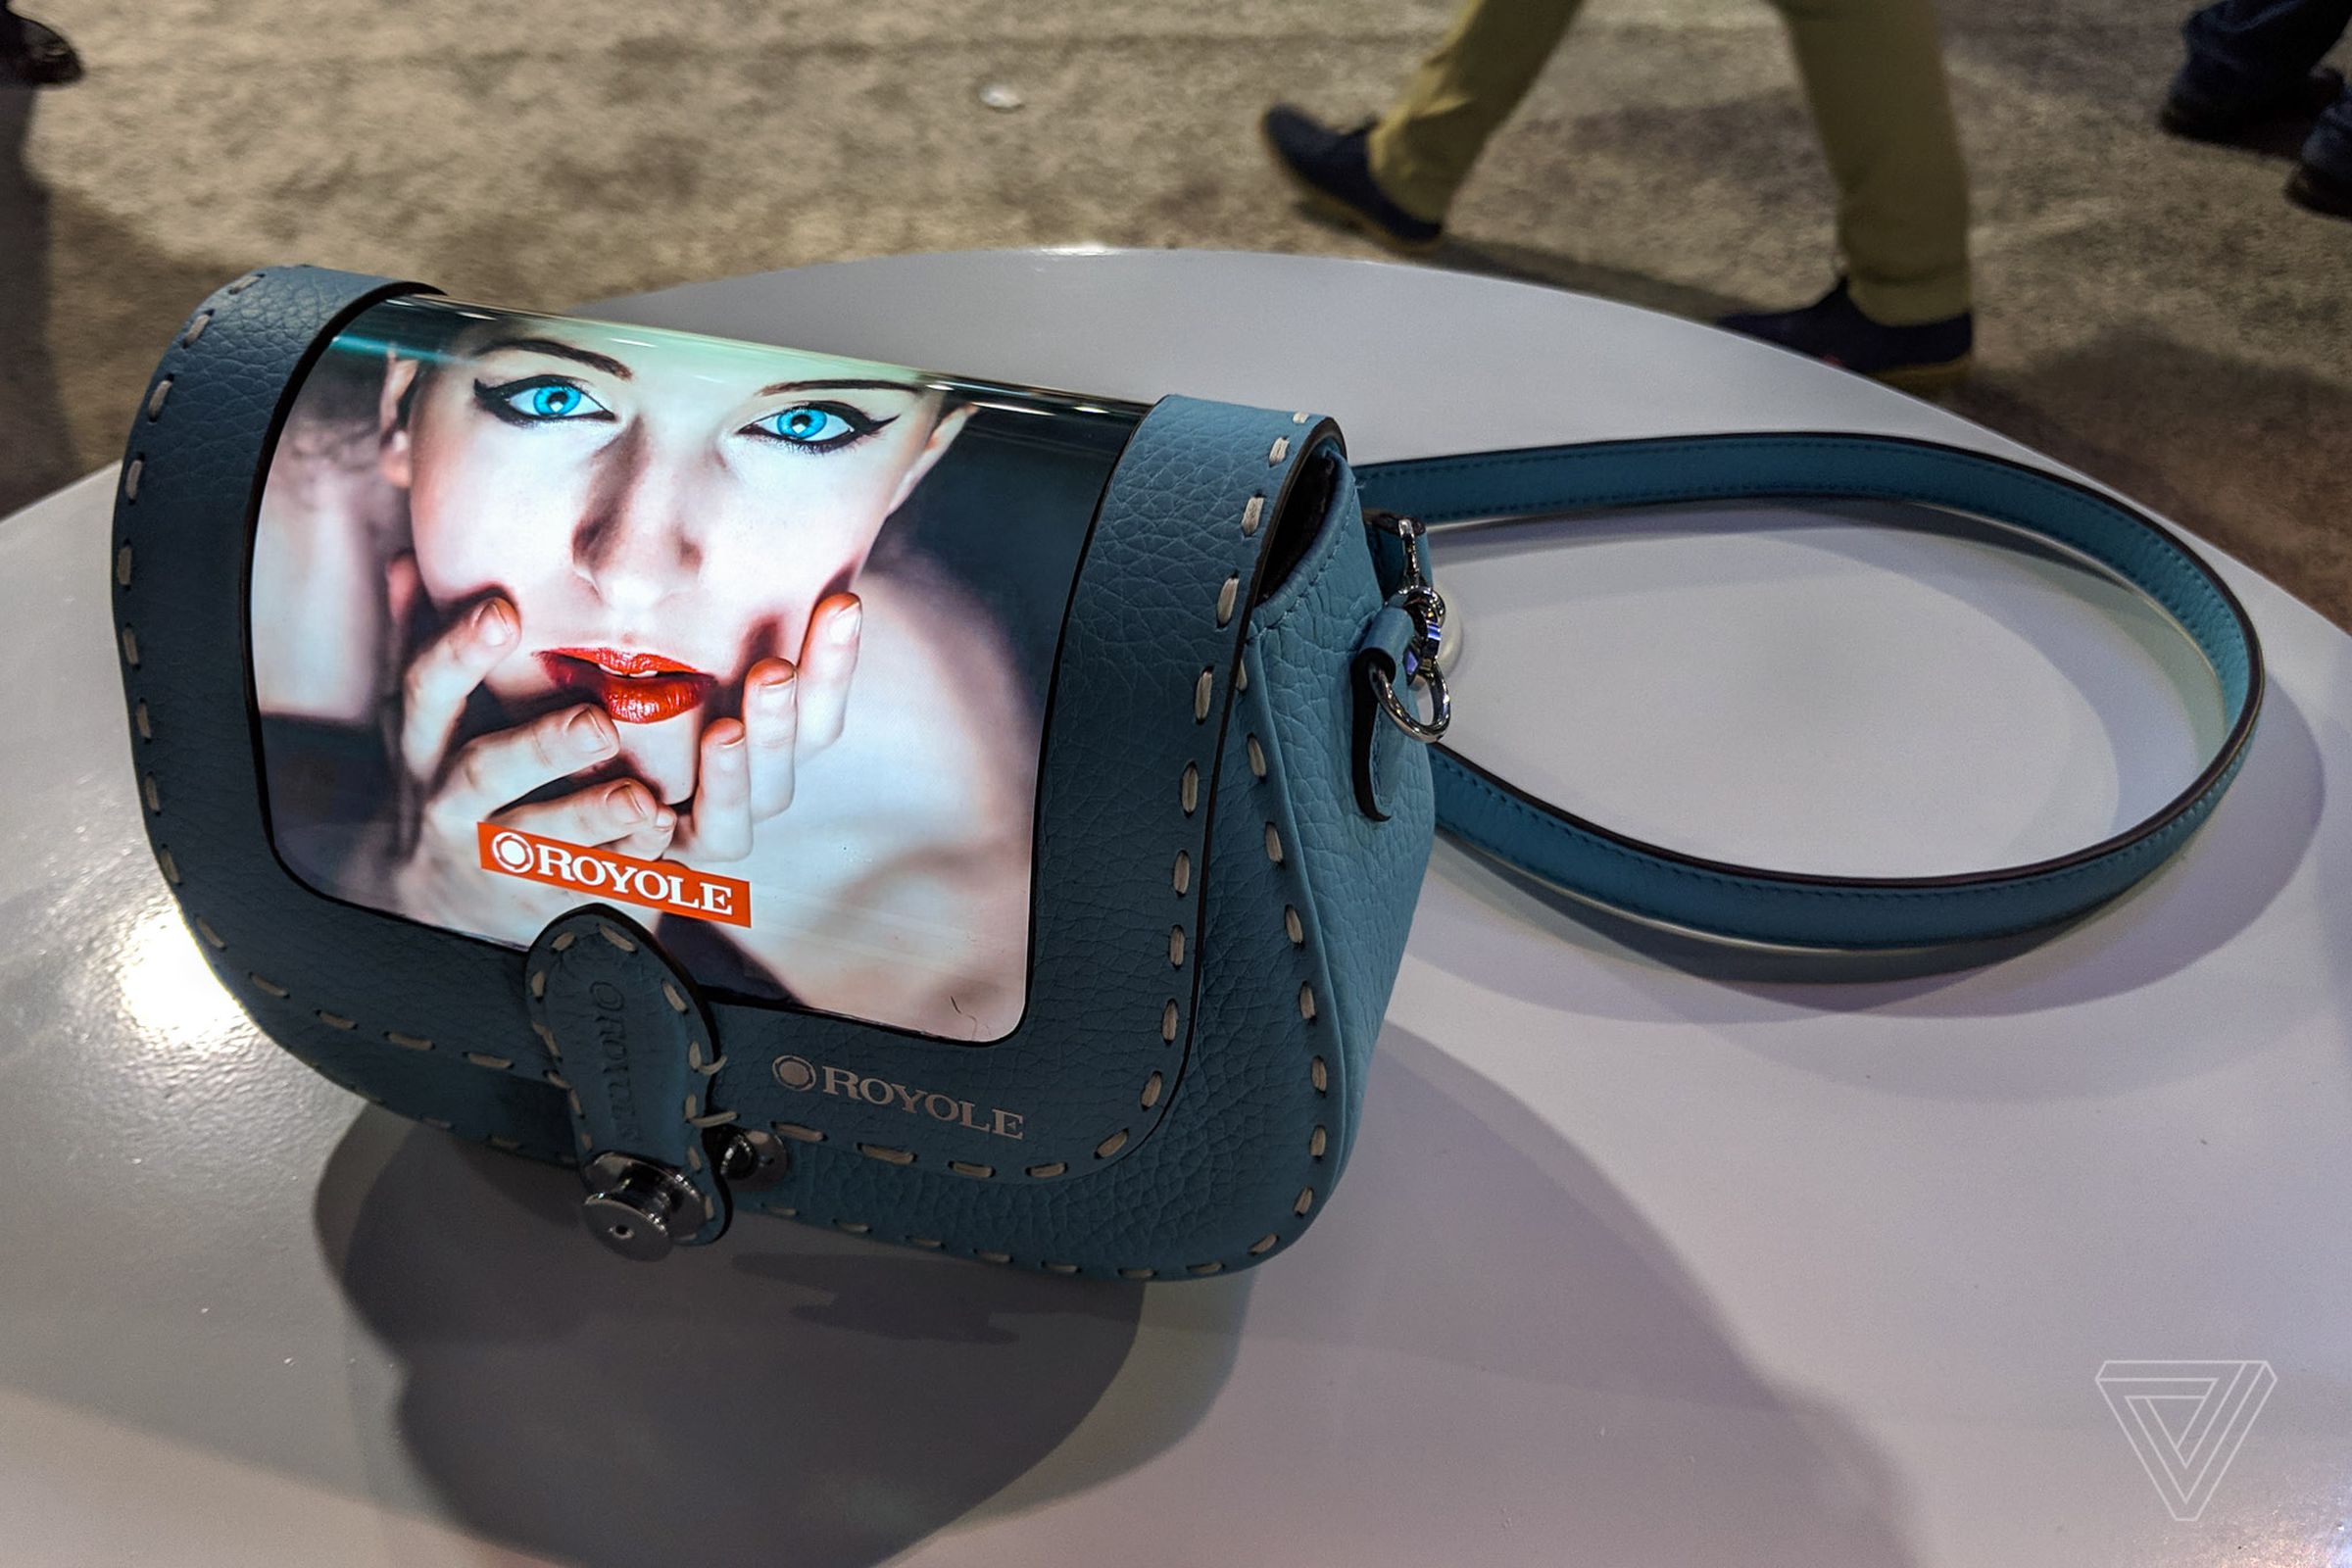 Royole had a purse prototype of its own at CES 2019.